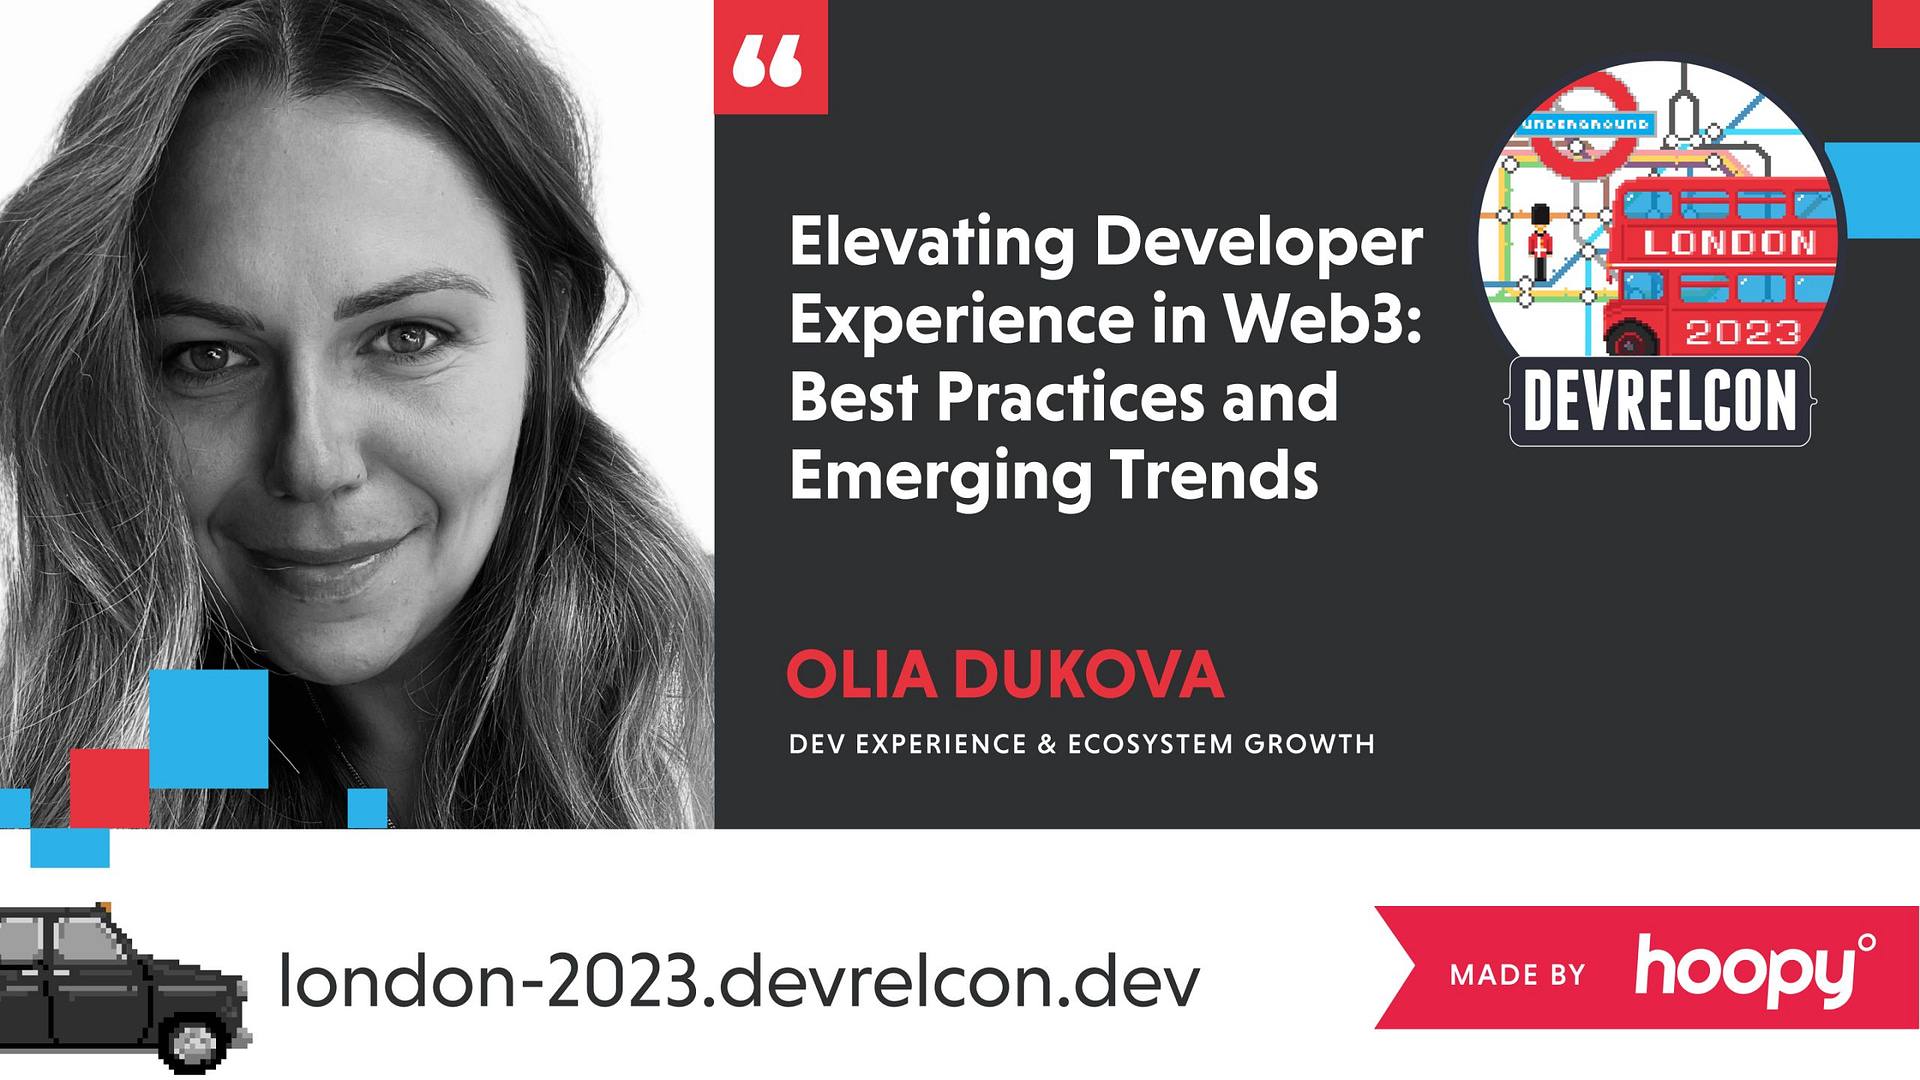 The image is a conference speaker announcement banner. It features a black and white photo of a woman named Olia Dukova, who specializes in Dev Experience & Ecosystem Growth. She will talk about "Elevating Developer Experience in Web3: Best Practices and Emerging Trends" at DEVRELCON London, 2023. The design includes London-themed elements such as the Underground sign and a red double-decker bus. The event's website, london-2023.devrelcon.dev, is listed, and there is a black cab illustration at the bottom. The banner also has a "Made by Hoopy" credit.